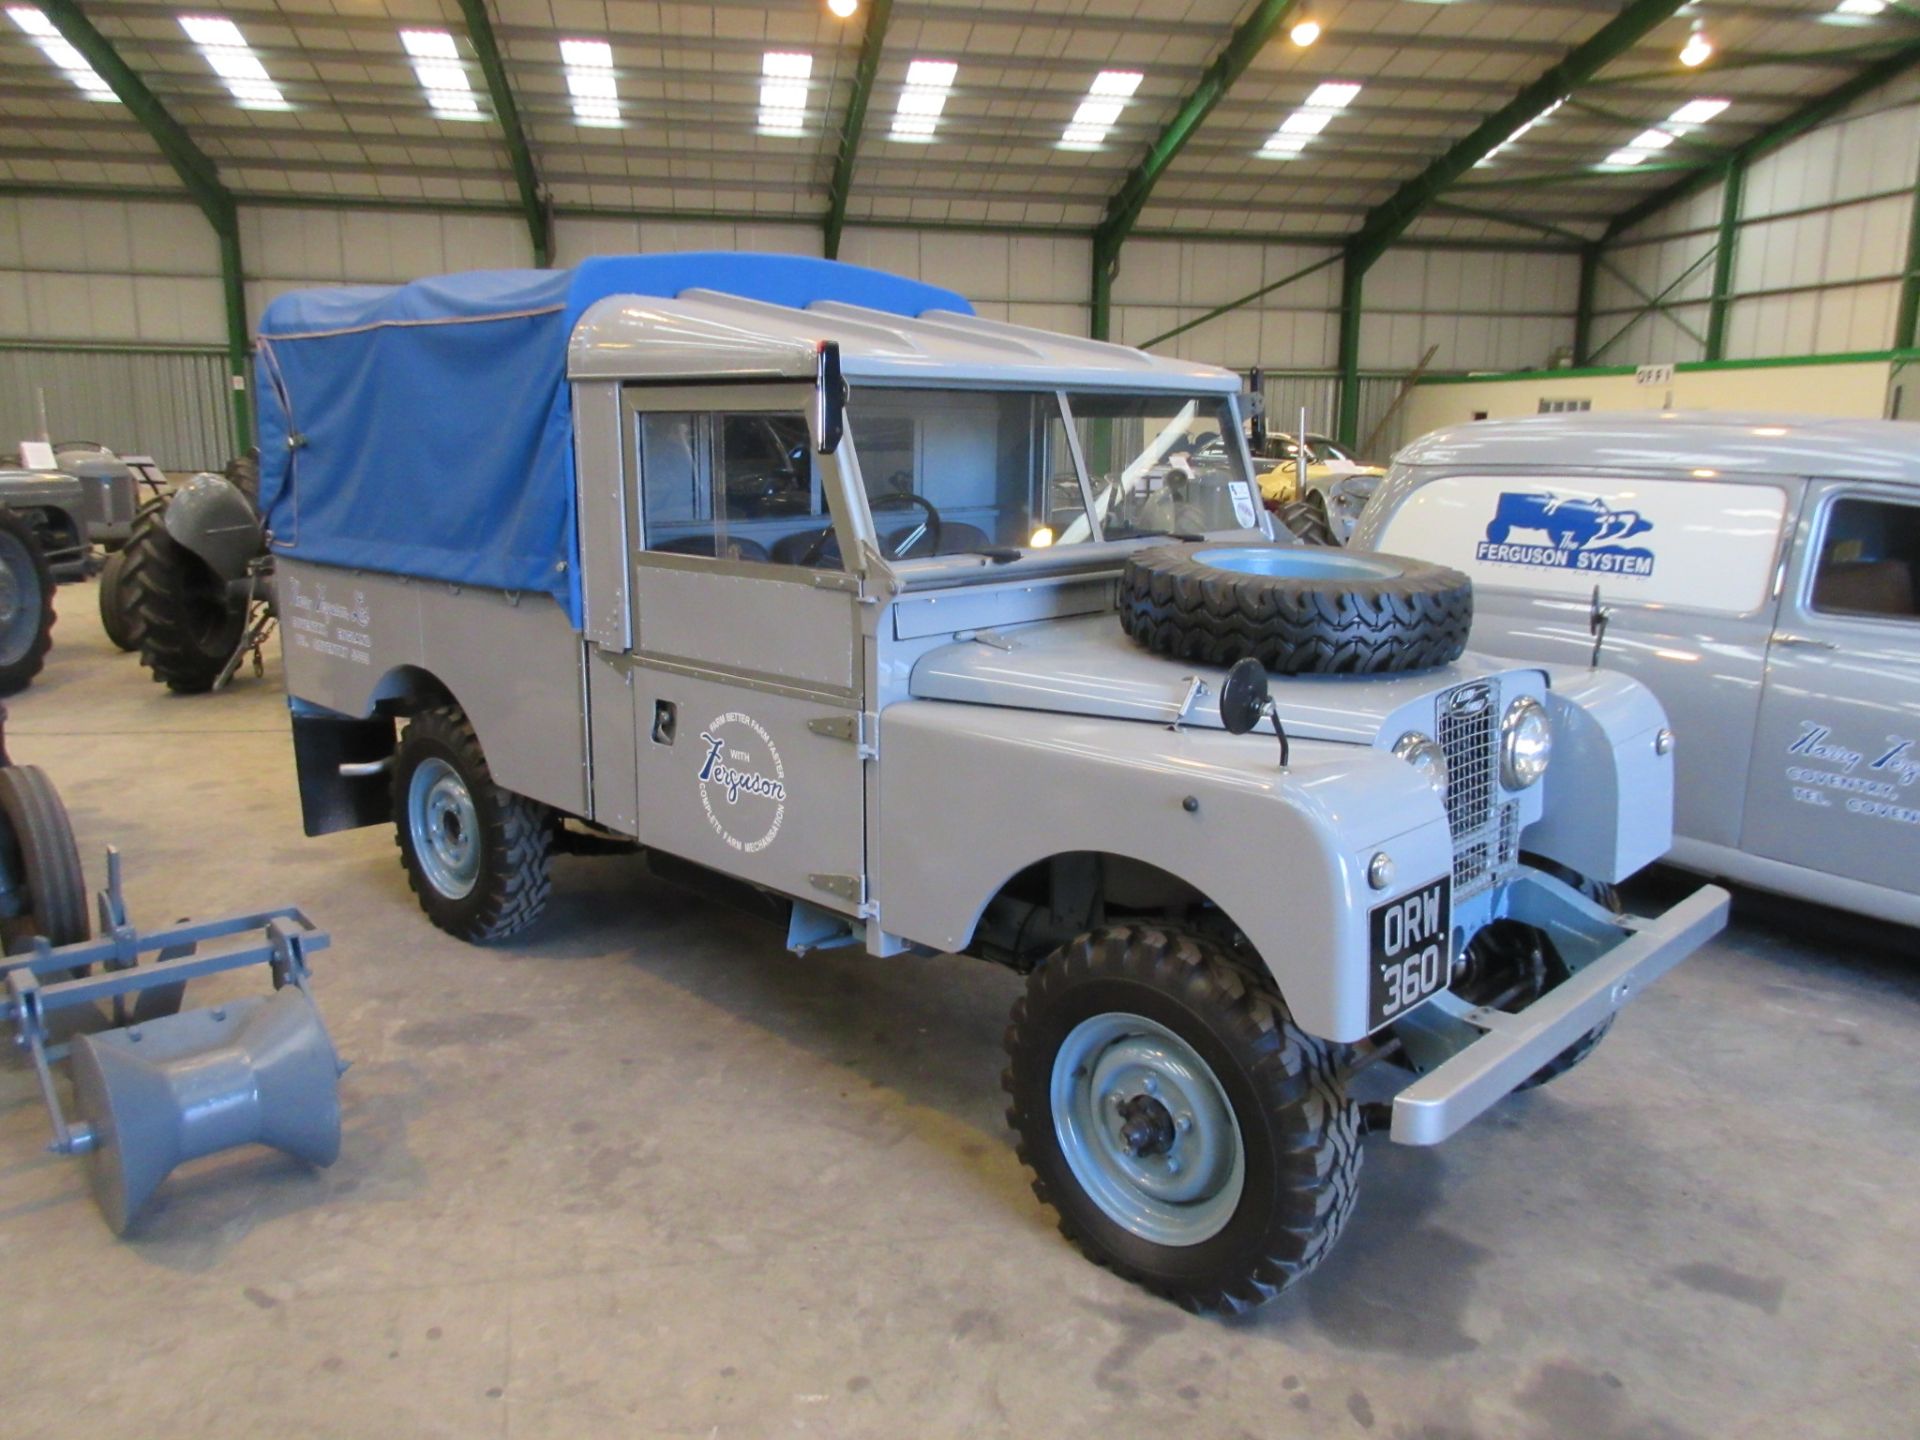 1953 Land Rover Series 1 107' Reg No: ORW 360 Serial No: 47200013 This historically-important